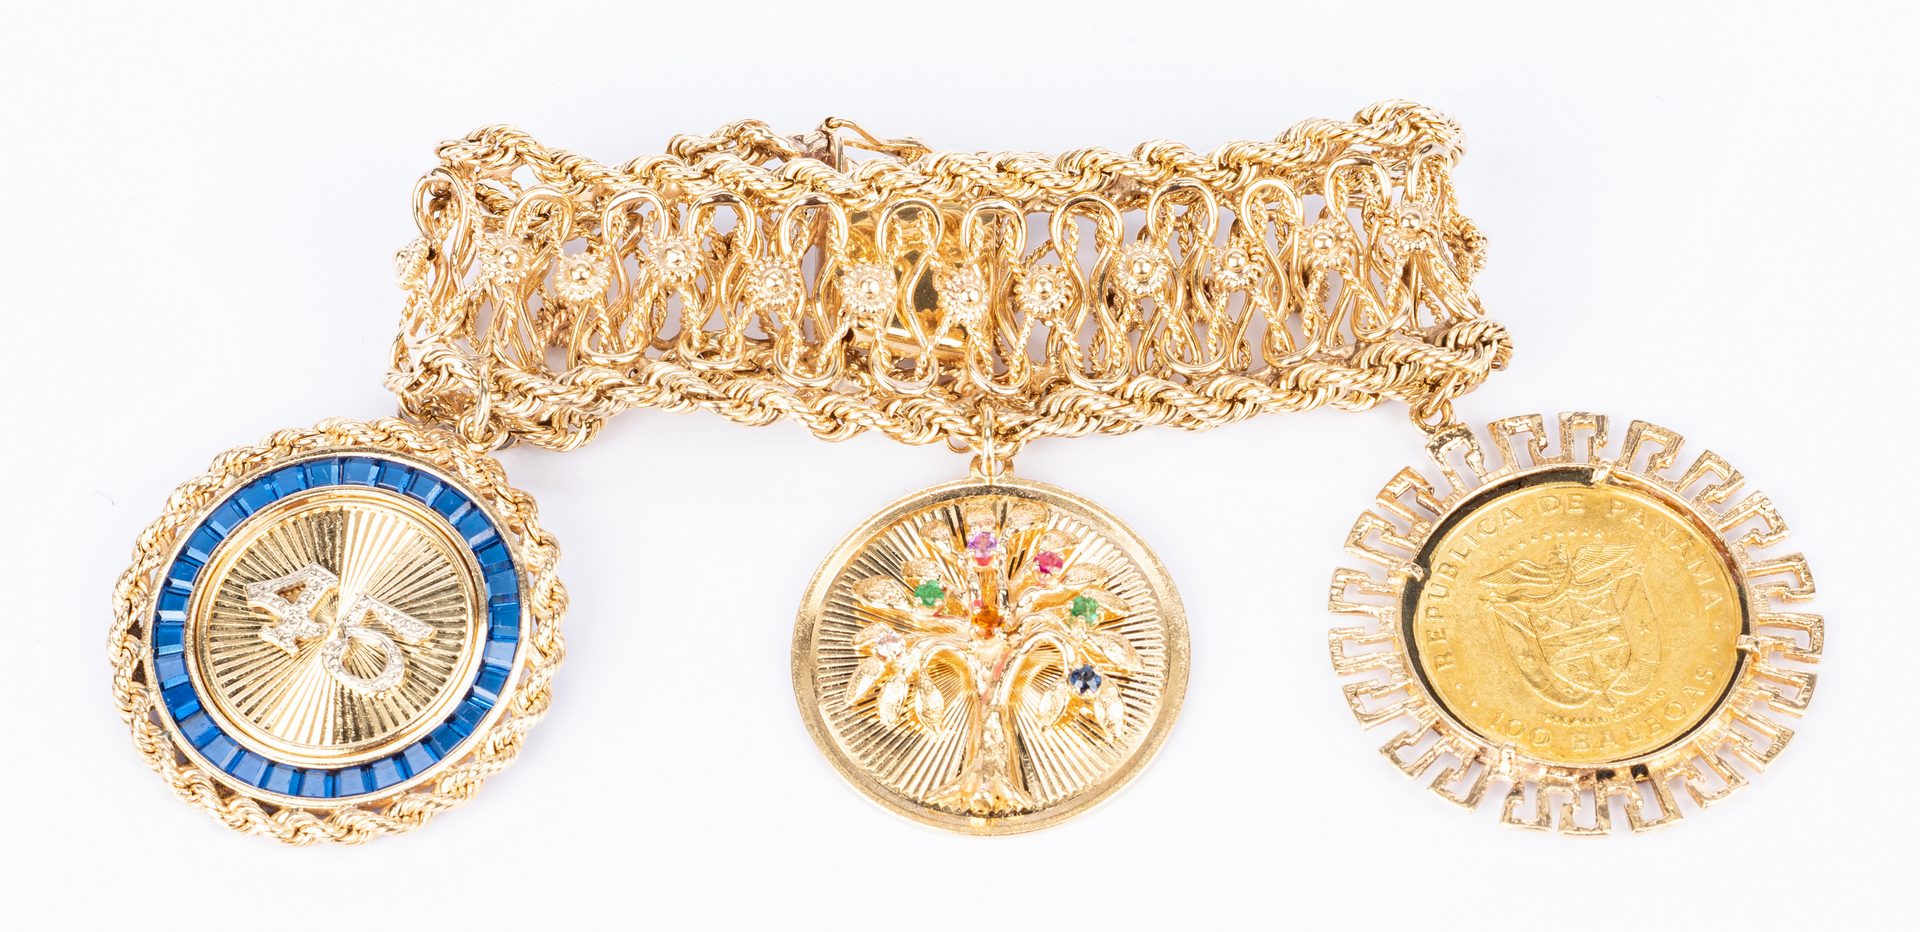 Sold at Auction: 14K YELLOW GOLD CHARM BRACELET W/ CHARMS, 73.7 GRAMS